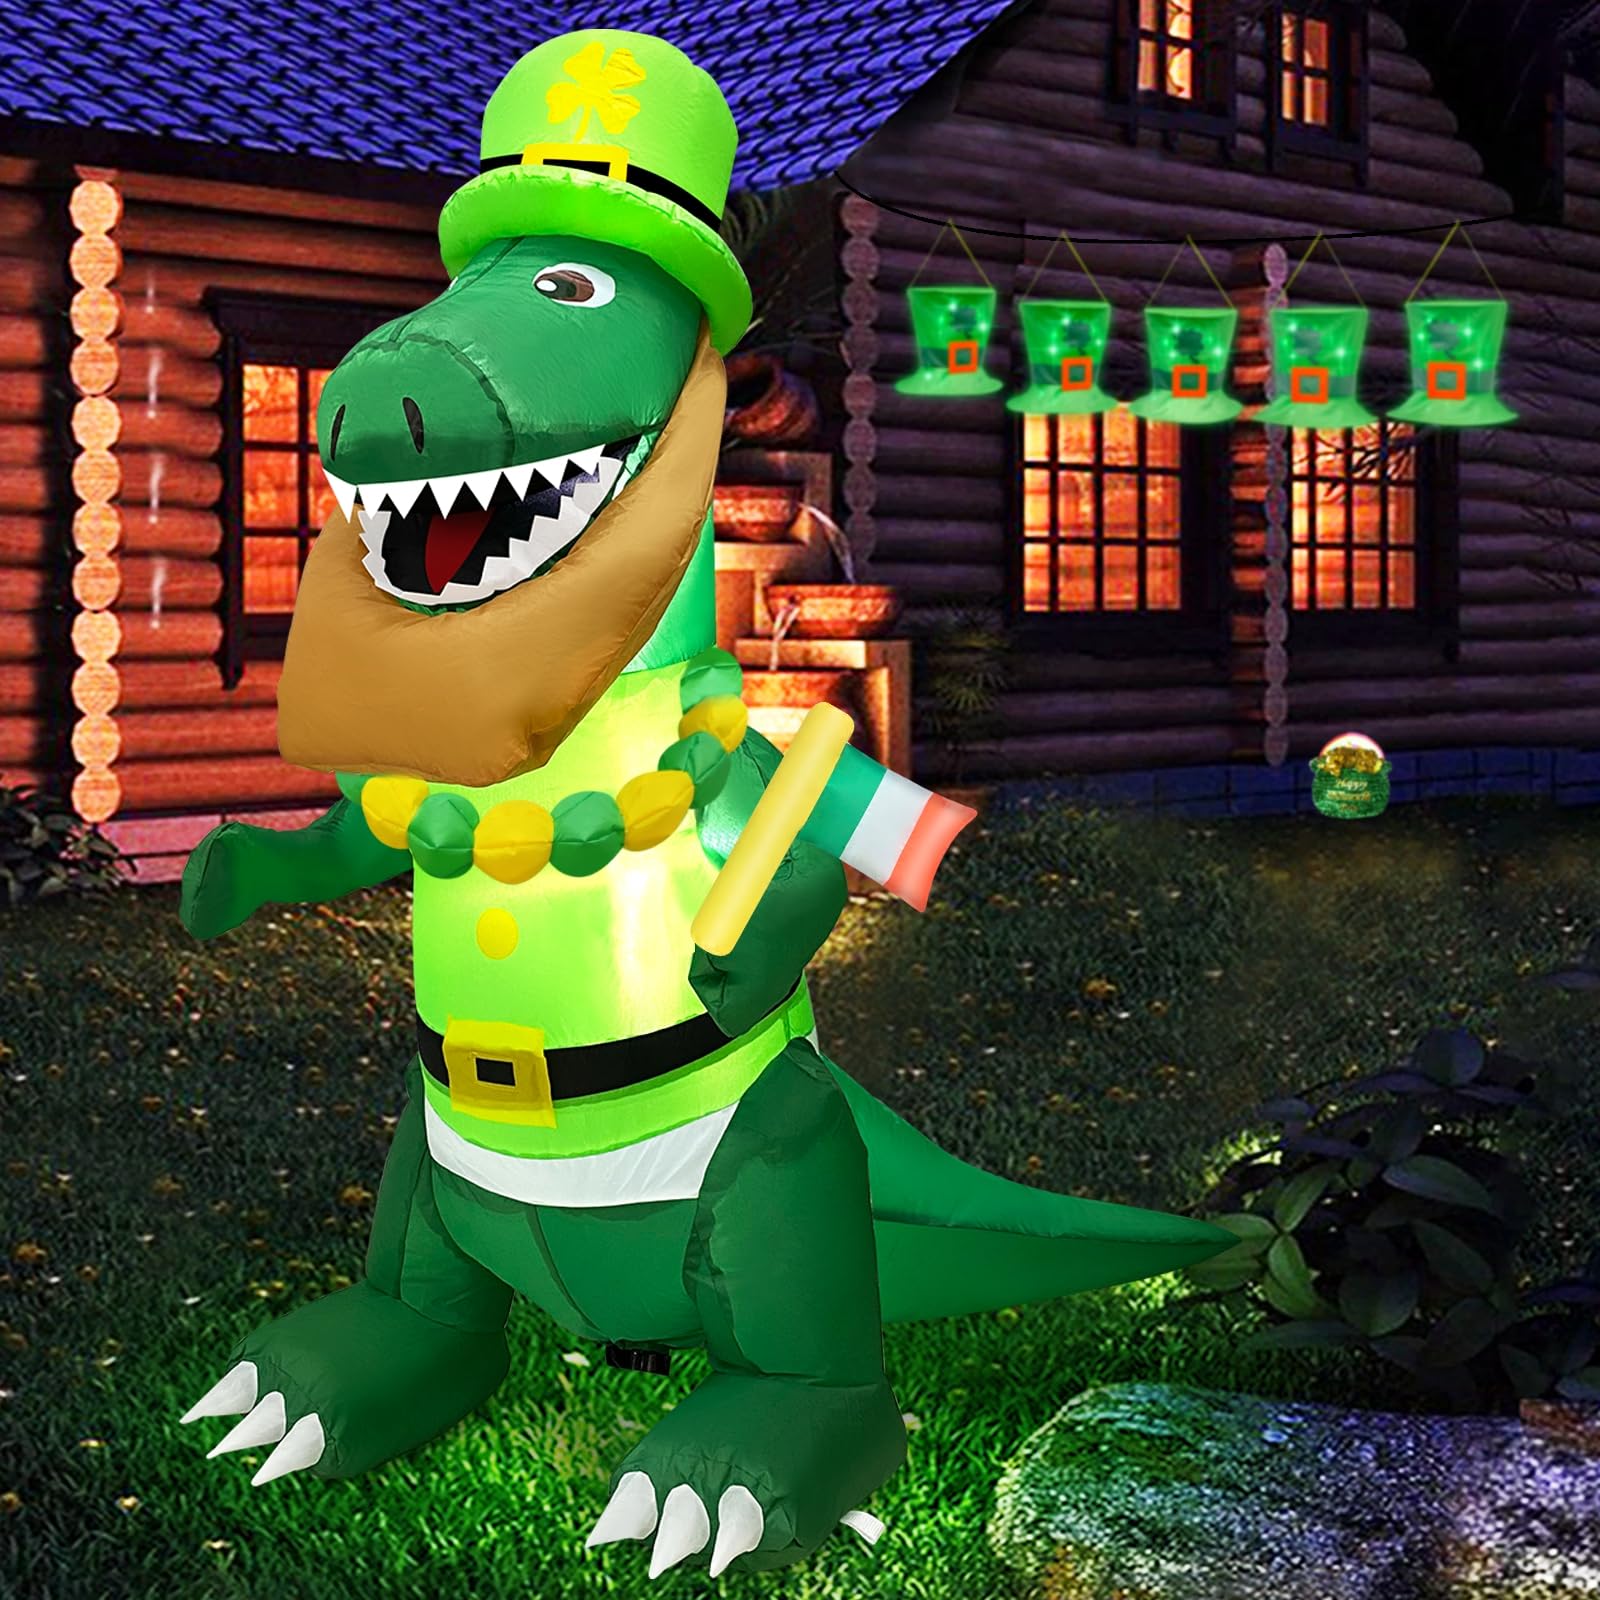 TURNMEON 4FT Dinosaur St. Patrick's Day Inflatables Decorations Outdoor Blow Up Dinosaur Hold Irish Flag Wear Necklace Shamrocks Hat LED Lights St Patricks Day Decor Indoor Home Yard Garden Lawn Party